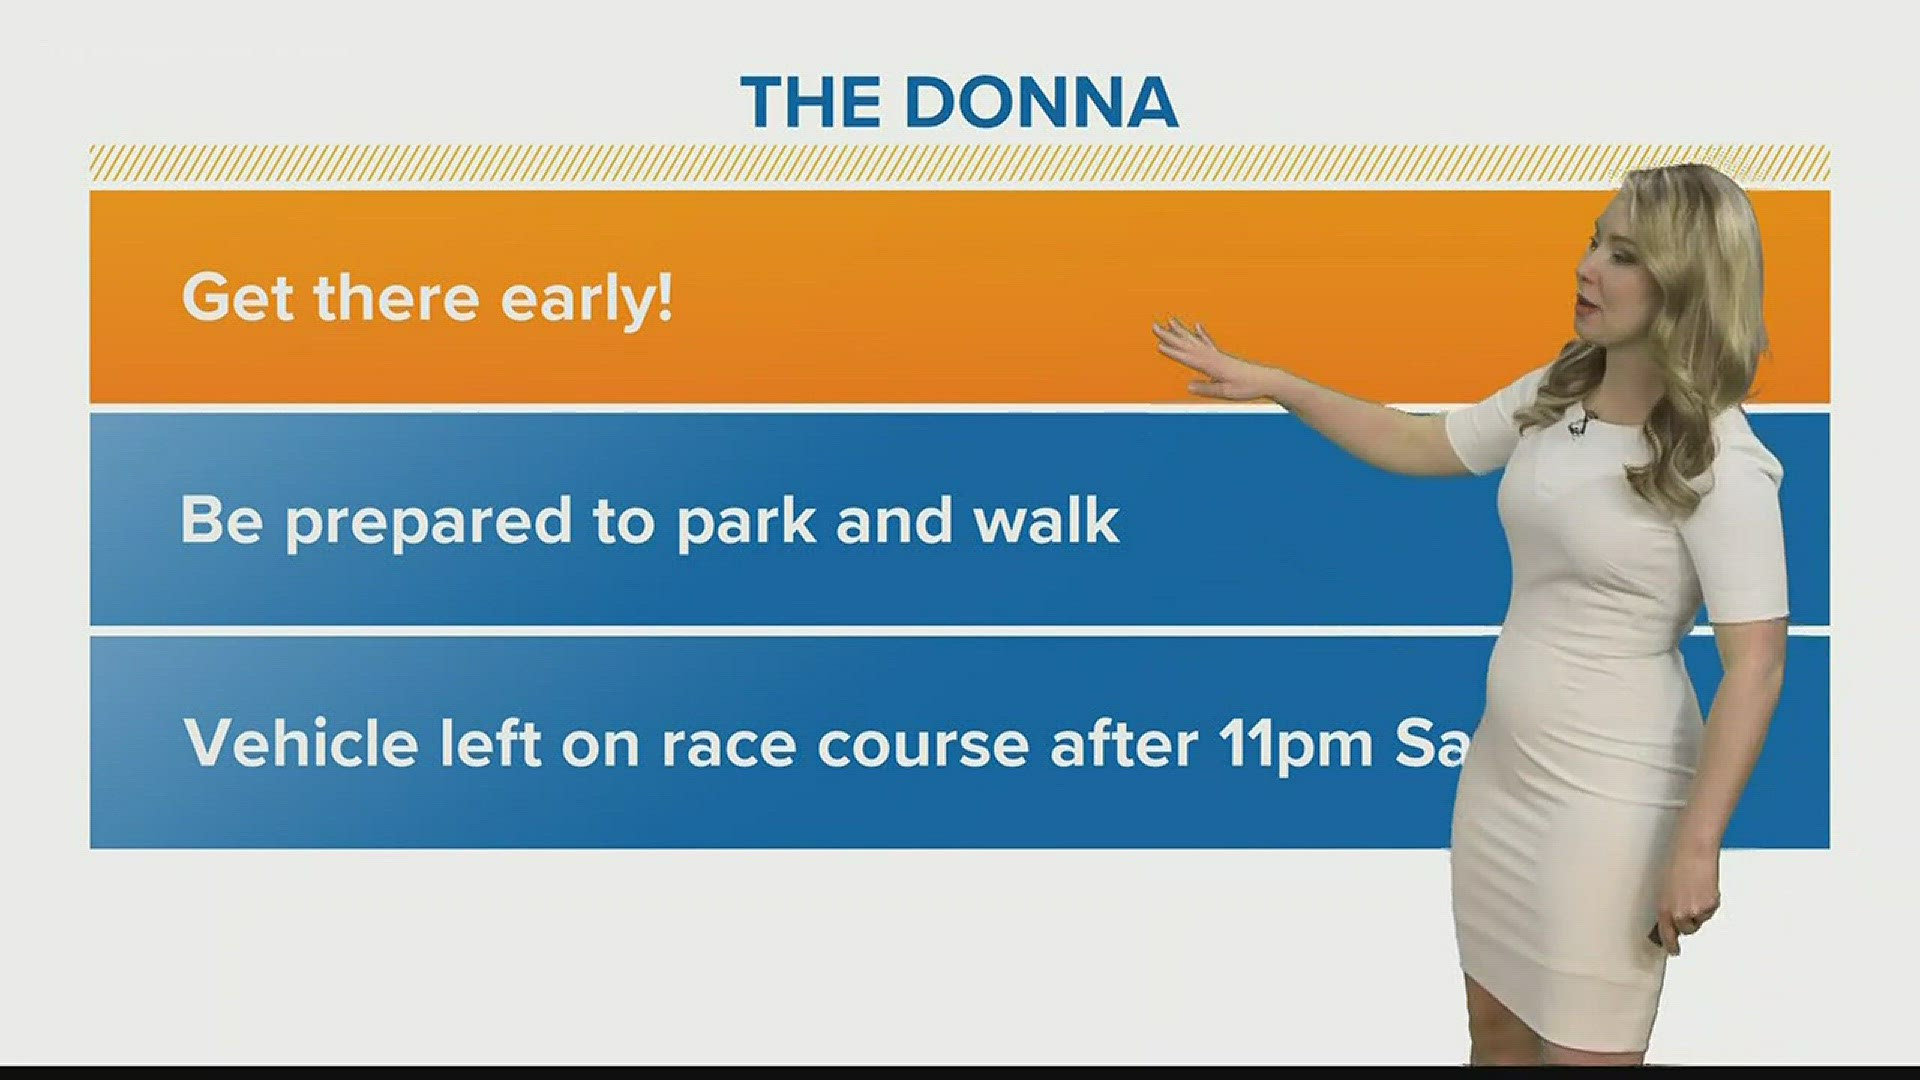 Katie Jeffries breaks down what to expect from traffic on the roads ahead of the Donna Marathon.